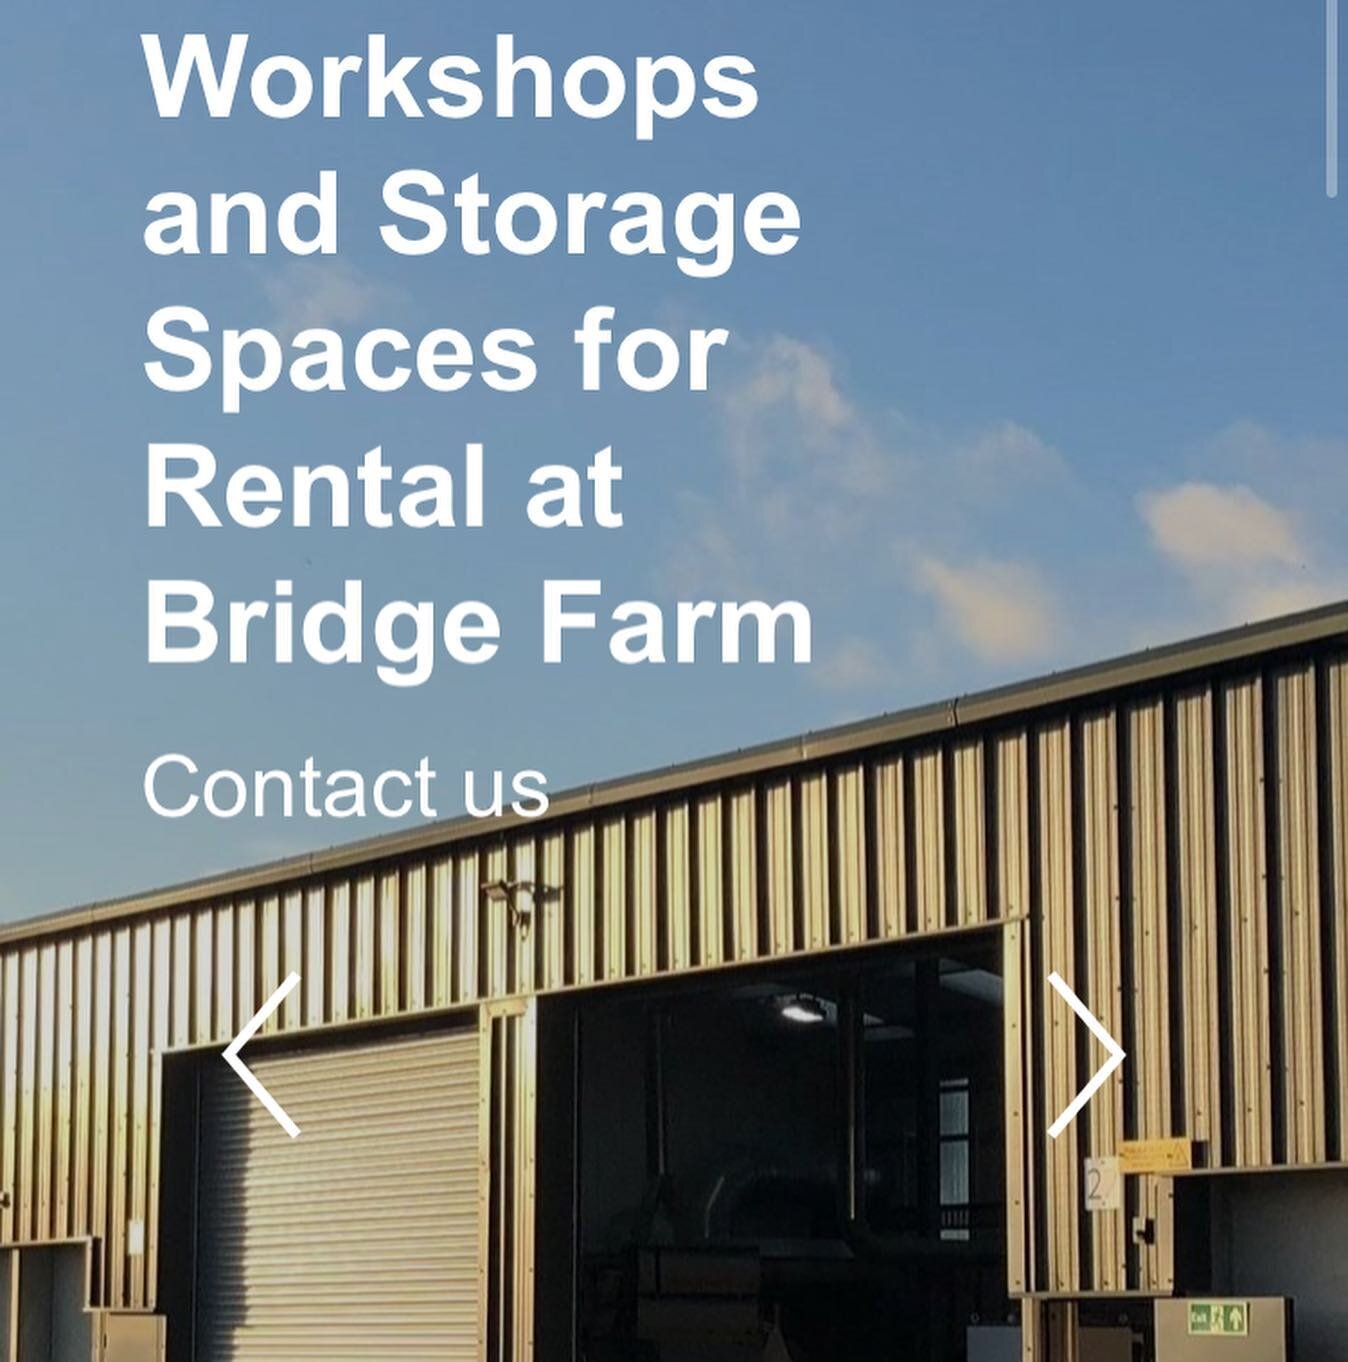 🚨 Our website has had a little revamp - go check it out 👍 link in bio!
.
.
.
#bridgefarmworkshops #website #websitedesign #new #photography #lettings #eastsussex